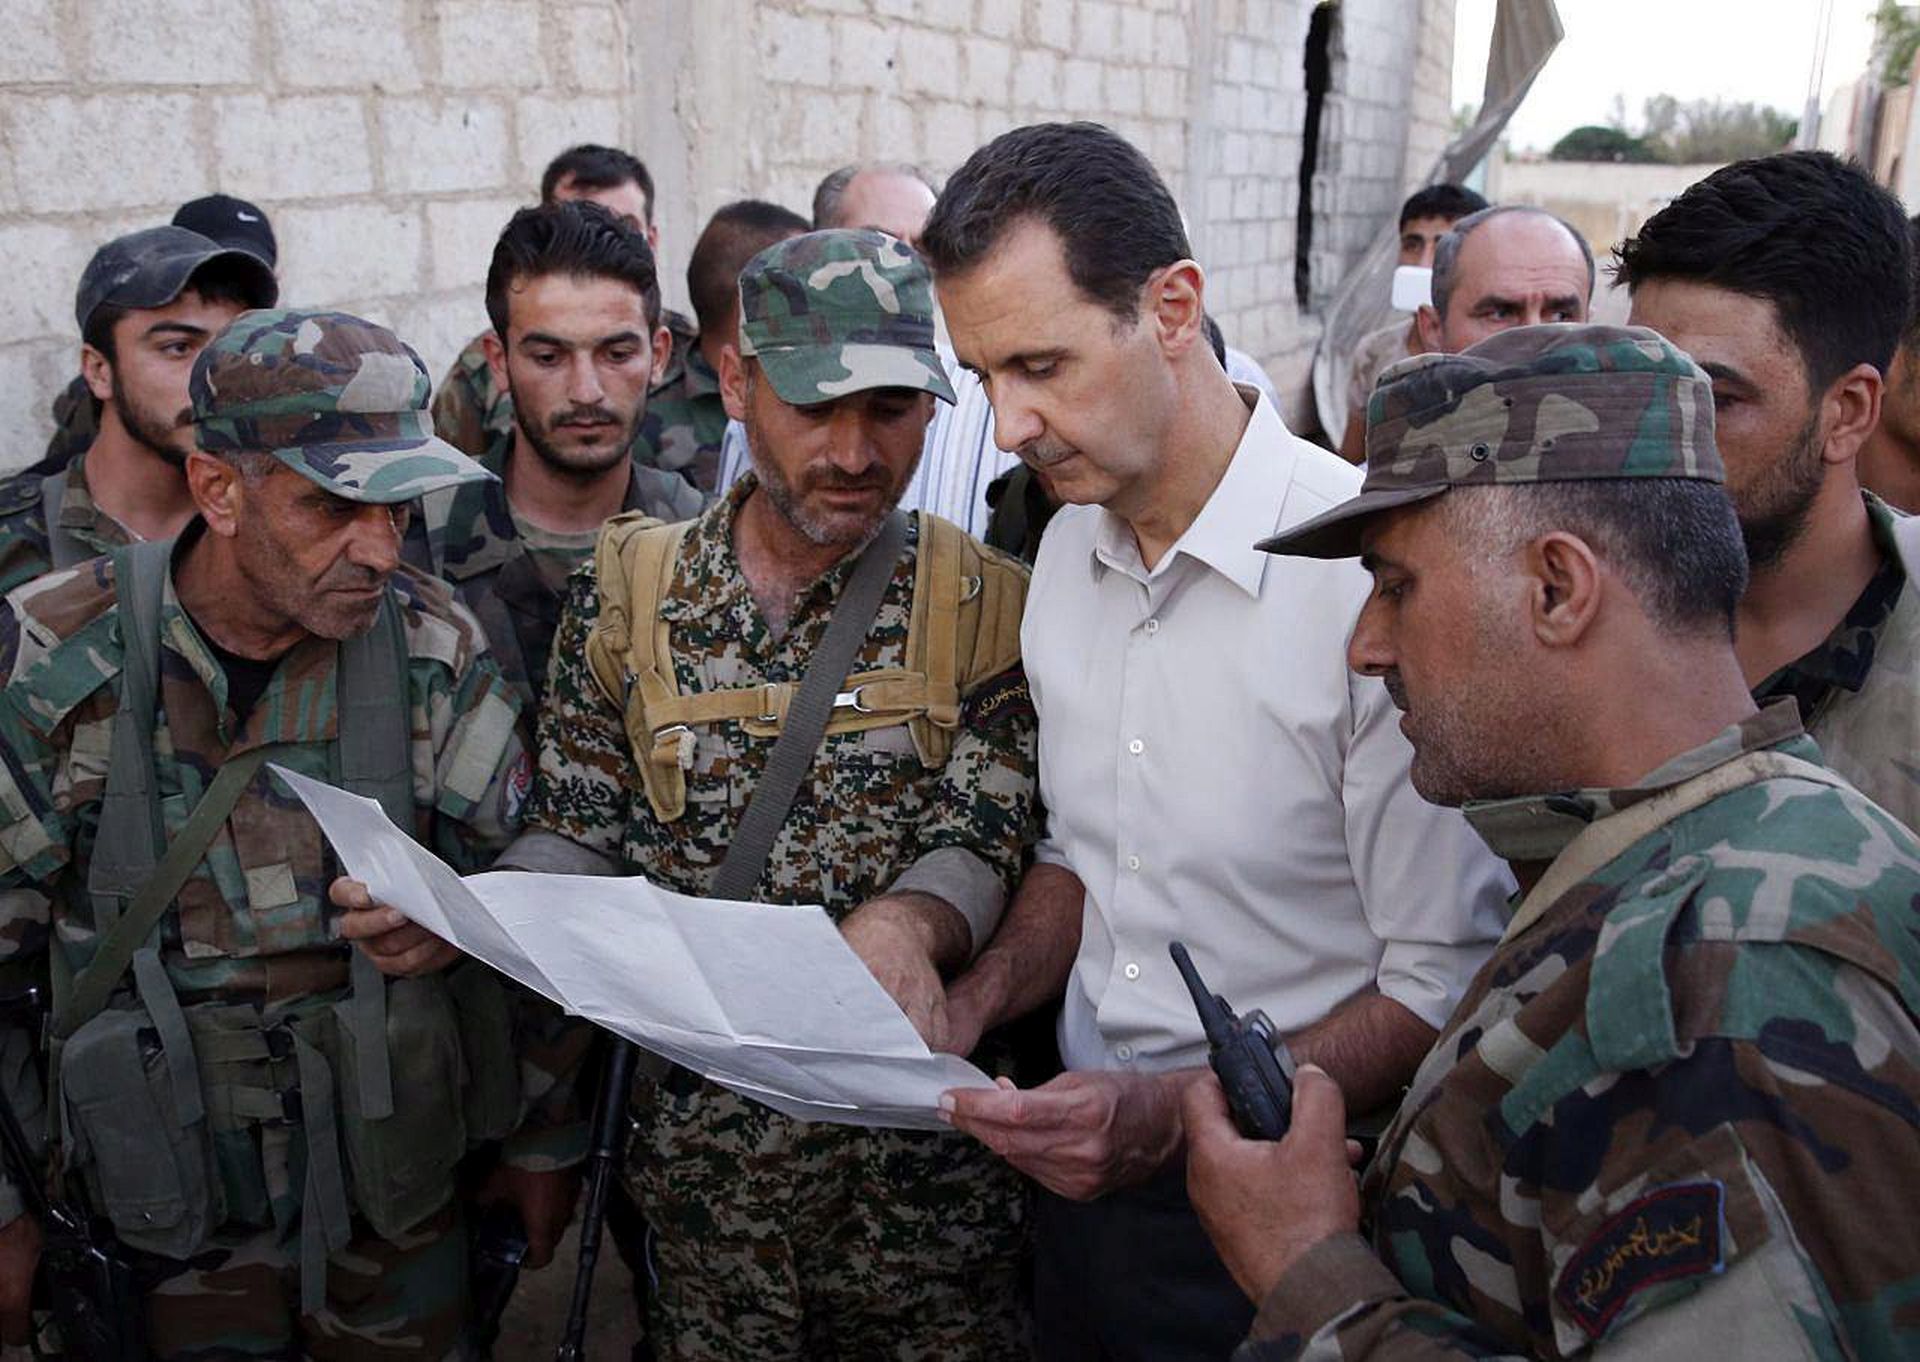 epa05394246 A handout picture made available on 27 June 2016 by Syrian Arab news agency (SANA) shows Syrian President Bashar al-Assad (C-R) meets with Syrian soldiers before he take his Iftar (break of fasting) of Ramadan along with members of the Syrian Arab army in Marj al-Sultan airport, Kharabou area, in Eastern Ghouta of Damascus countryside, Syria, 26 June 2016. Earlier President al-Assad wandered advanced points in the first array of Marj al-Sultan farms and the surrounding areas.  EPA/SANA / HANDOUT